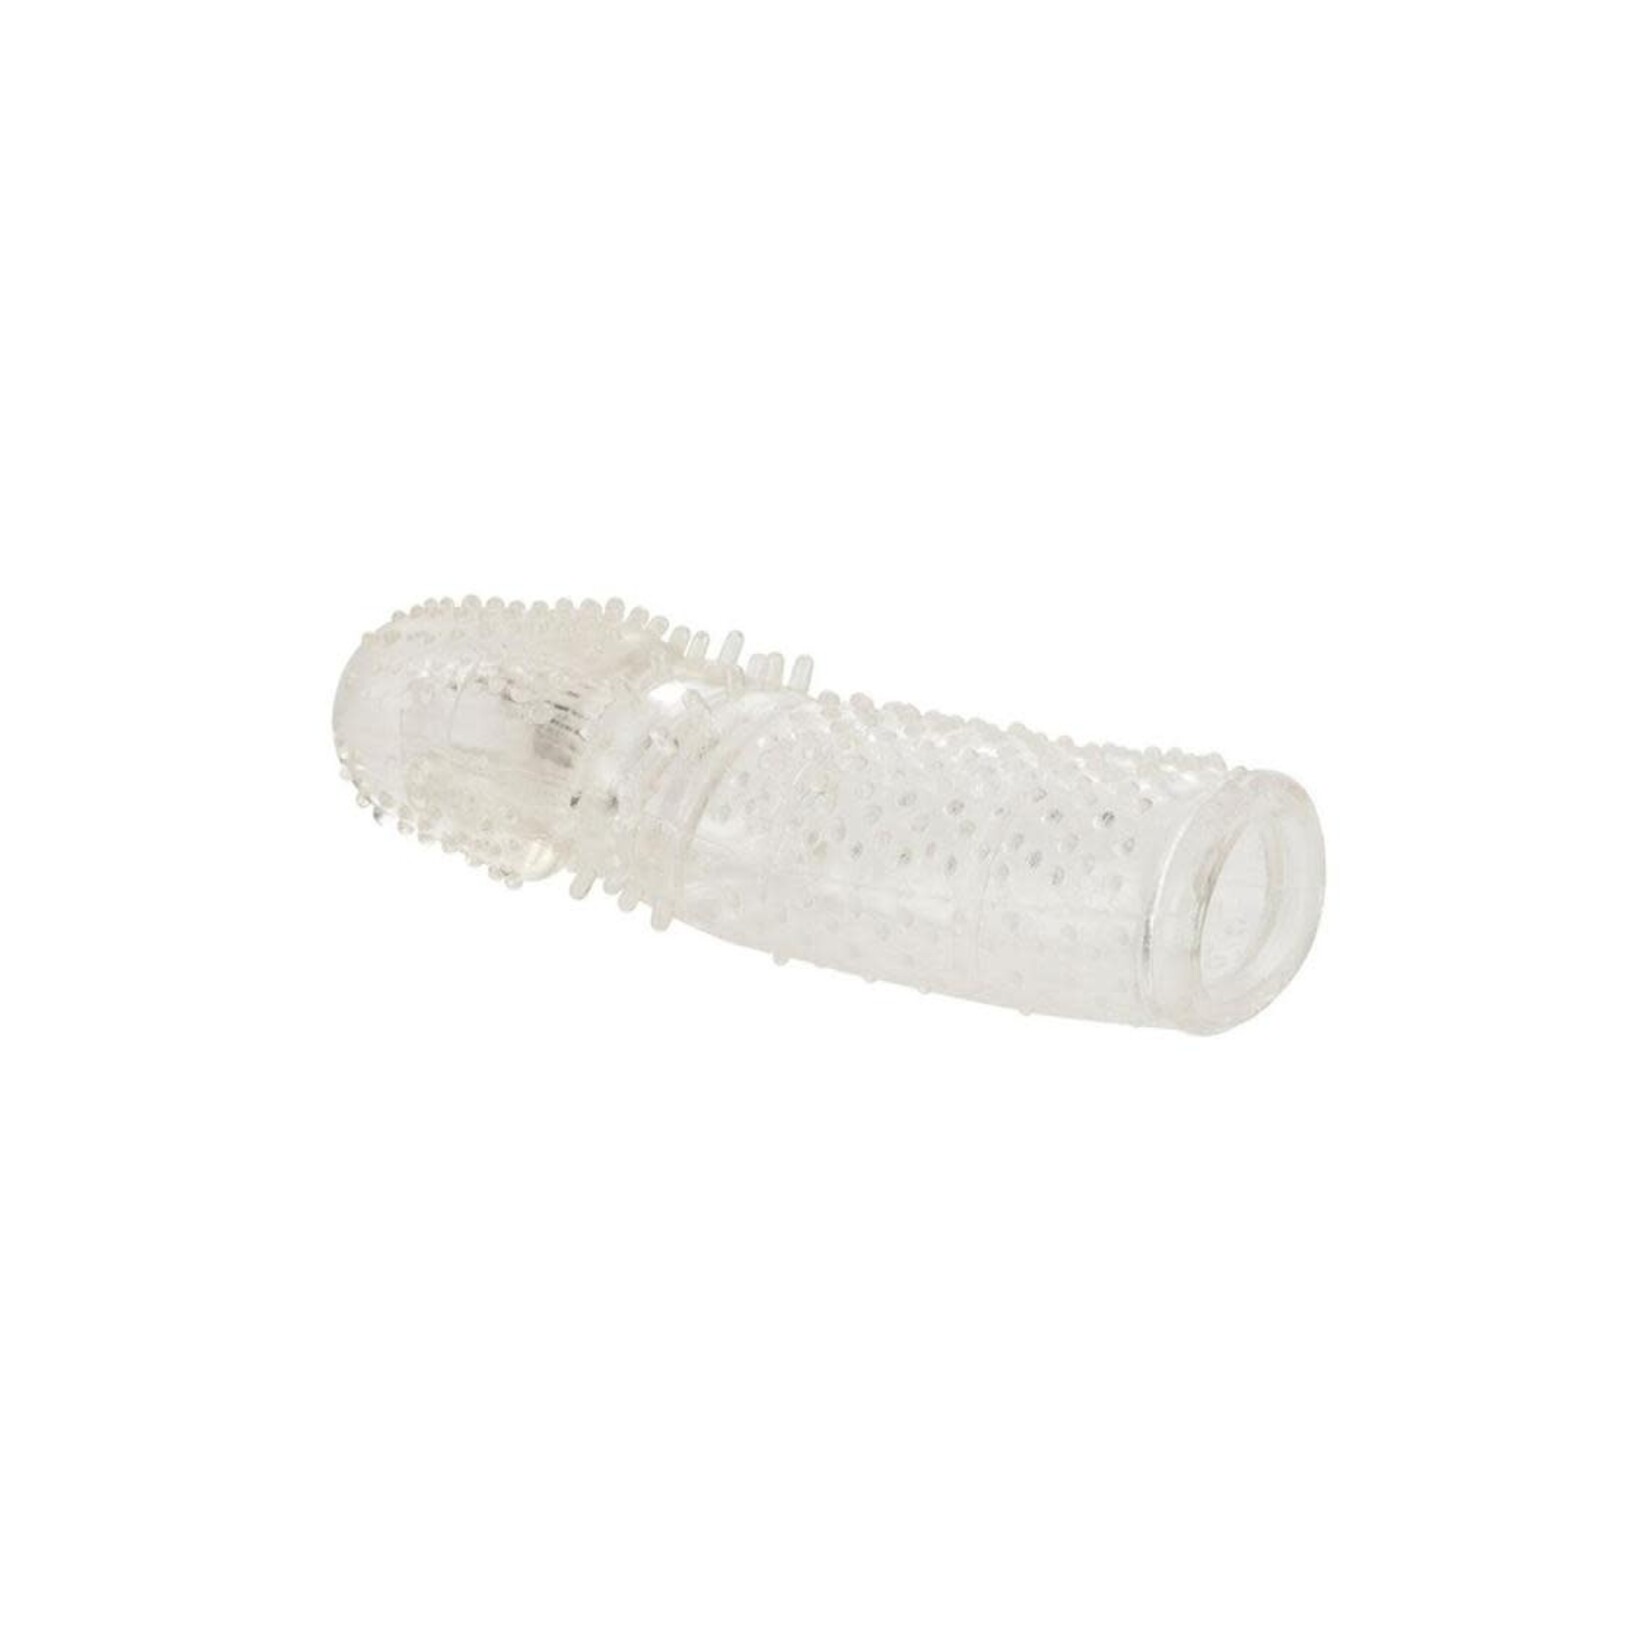 Senso Penis Extender - Clear